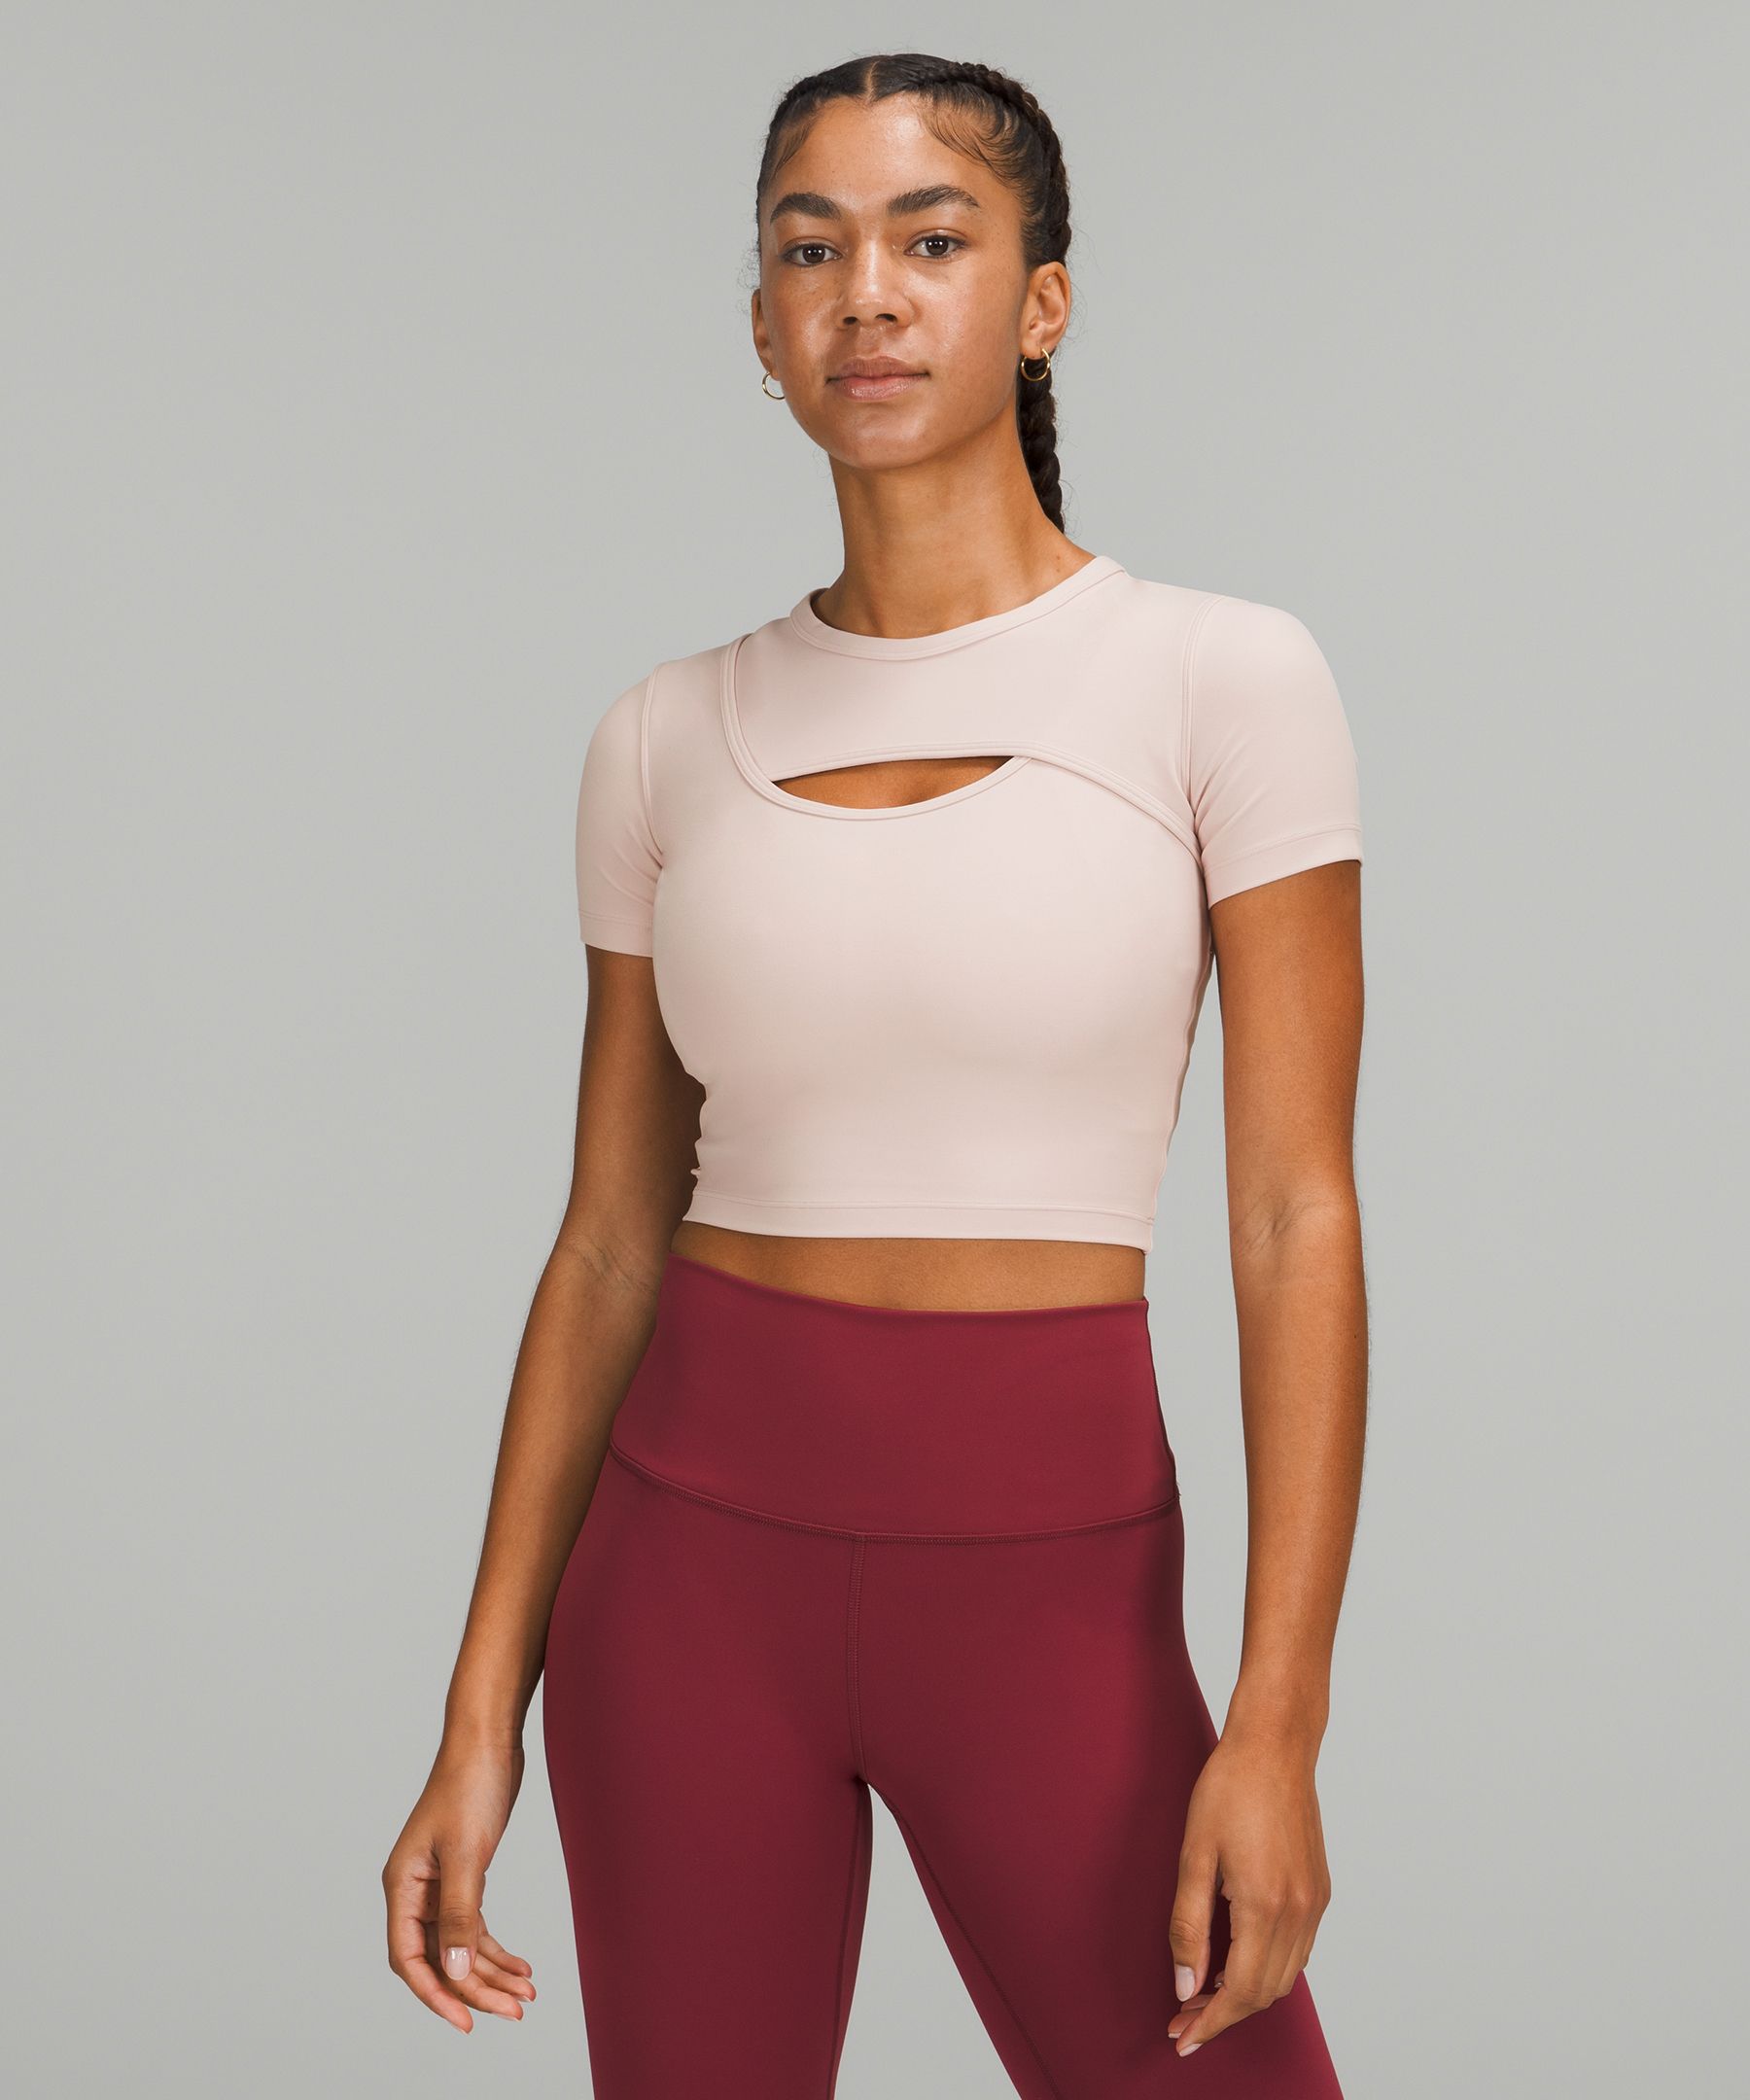 Shopping the wundermost collection and noticed disparity in sizing : r/ lululemon